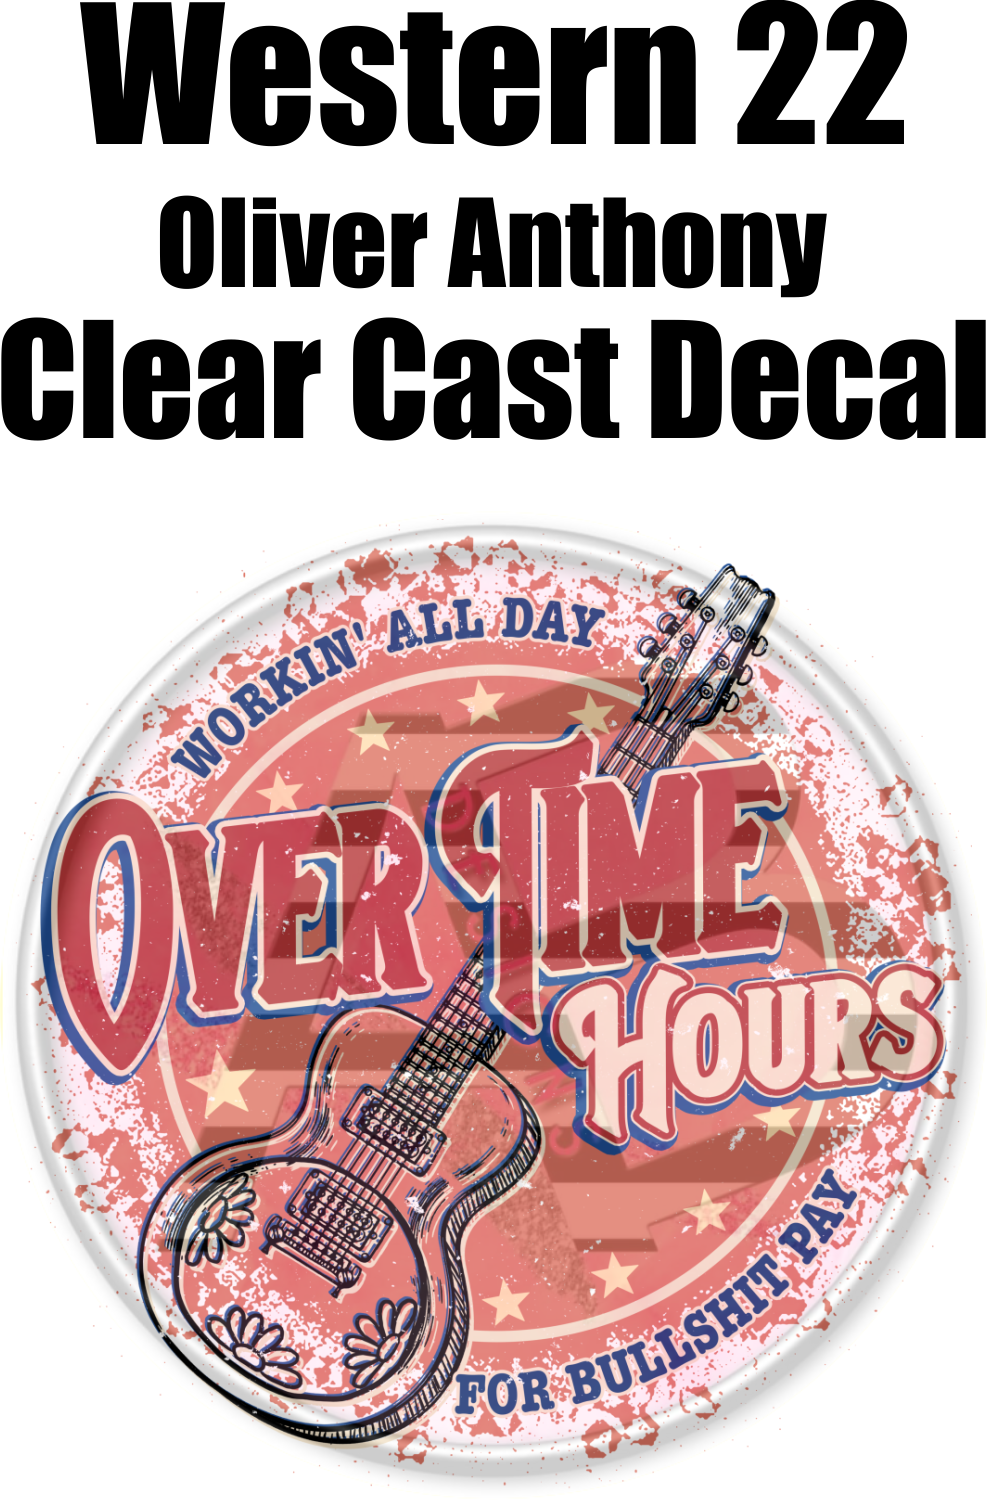 Western 22 - Clear Cast Decal - Oliver Anthony - 139